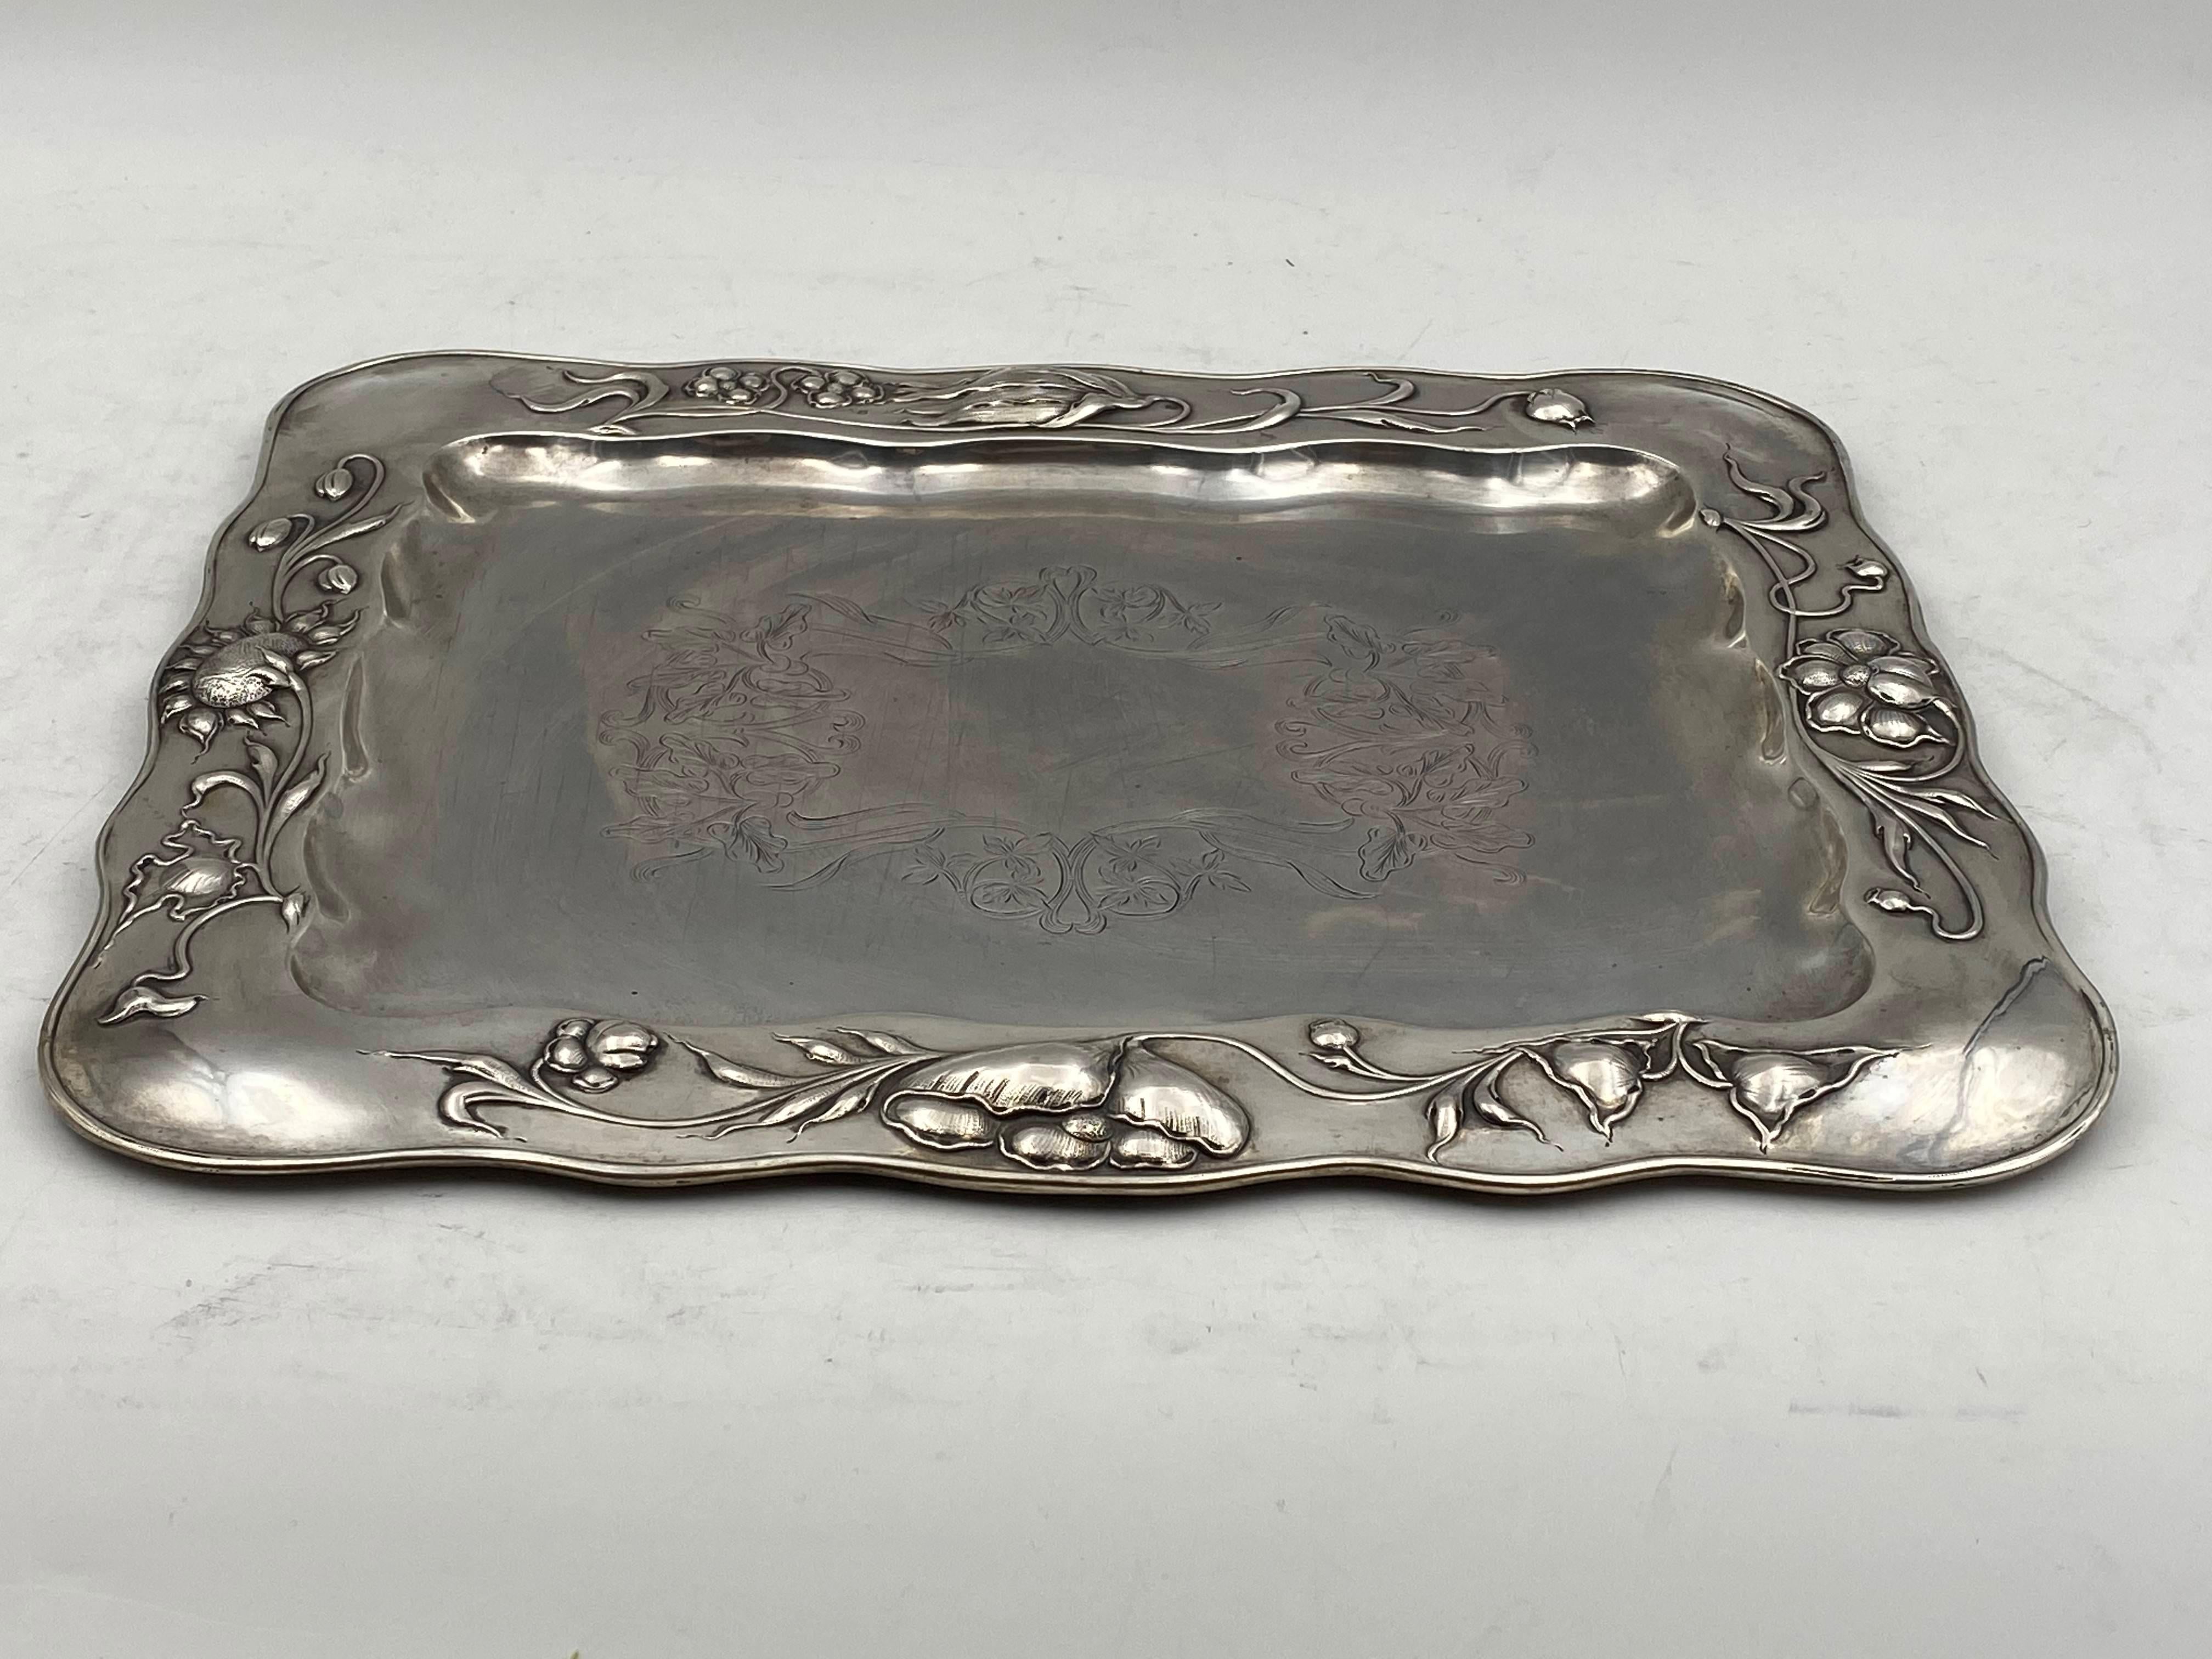 800 Continental silver tray platter by a Cracow-based silversmith made in the early 20th century in Art Nouveau style with exquisite raised floral patterns around the rim as well as engraved stylized flora at the heart of the tray. Measuring 16 1/2”